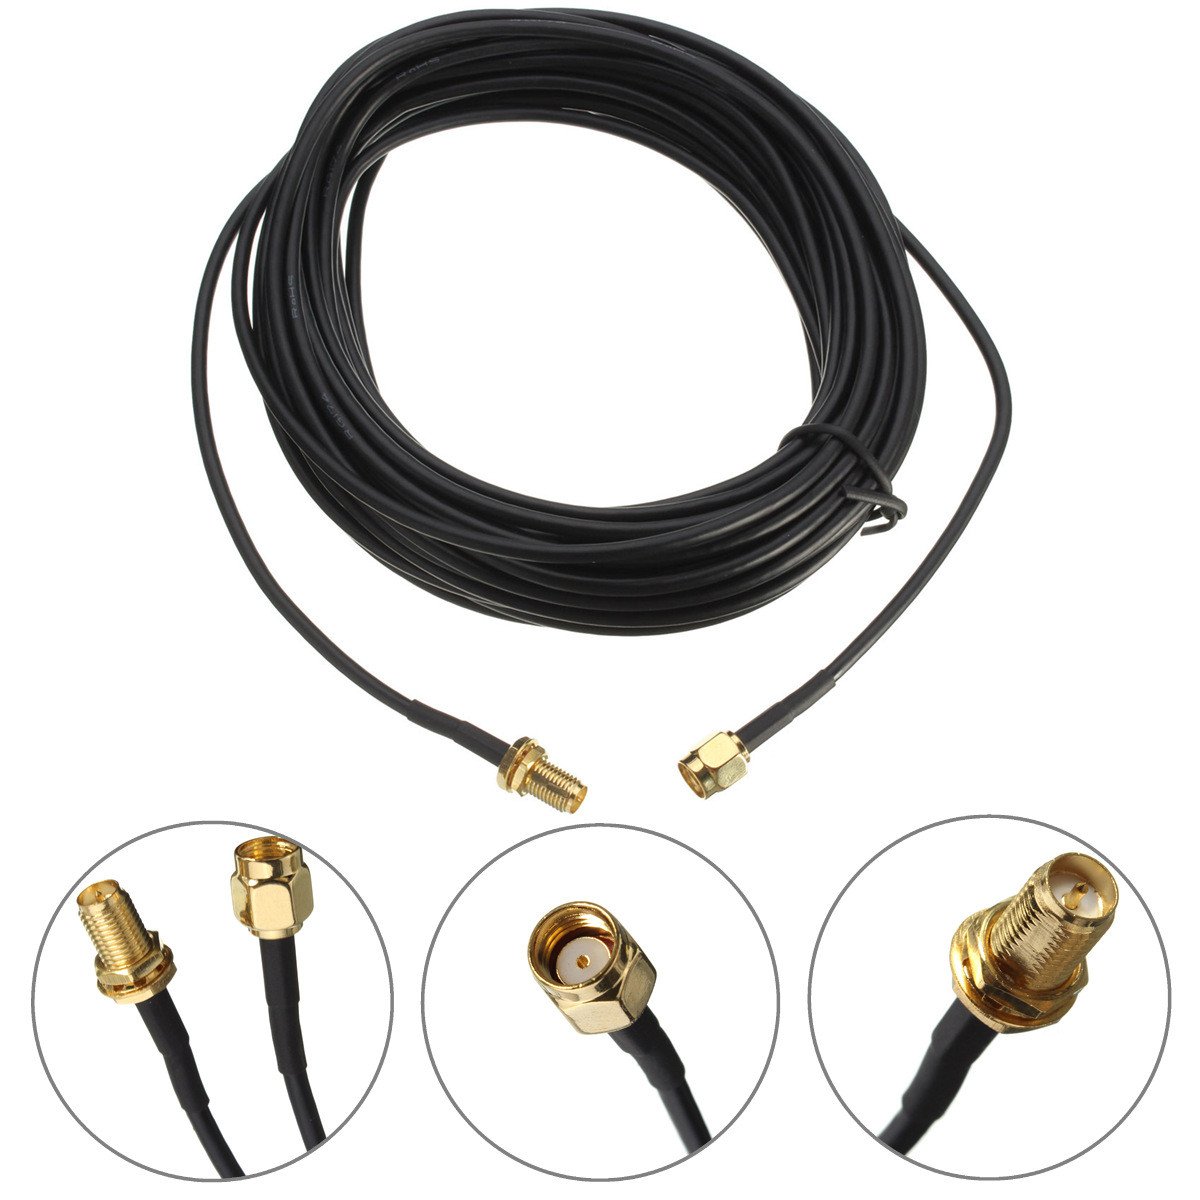 RG174 1M/5M RP-SMA Male to Female Wifi Antenna Extension Cable for Wireless Network Card Router AP 1